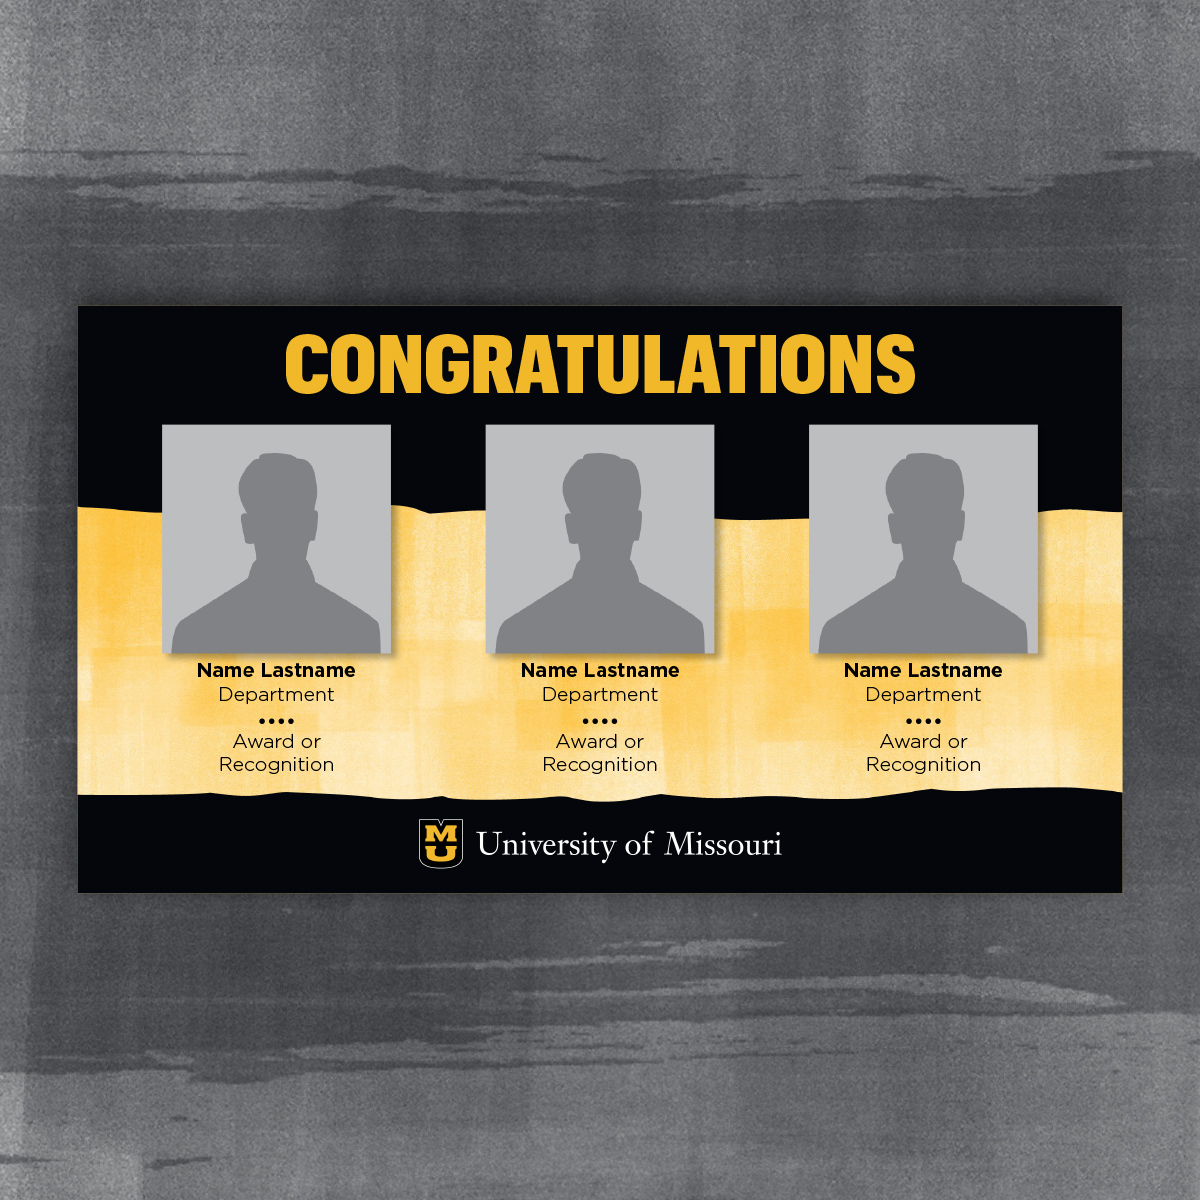 Congratulations slide for multiple square portraits. Black page tears and gold background